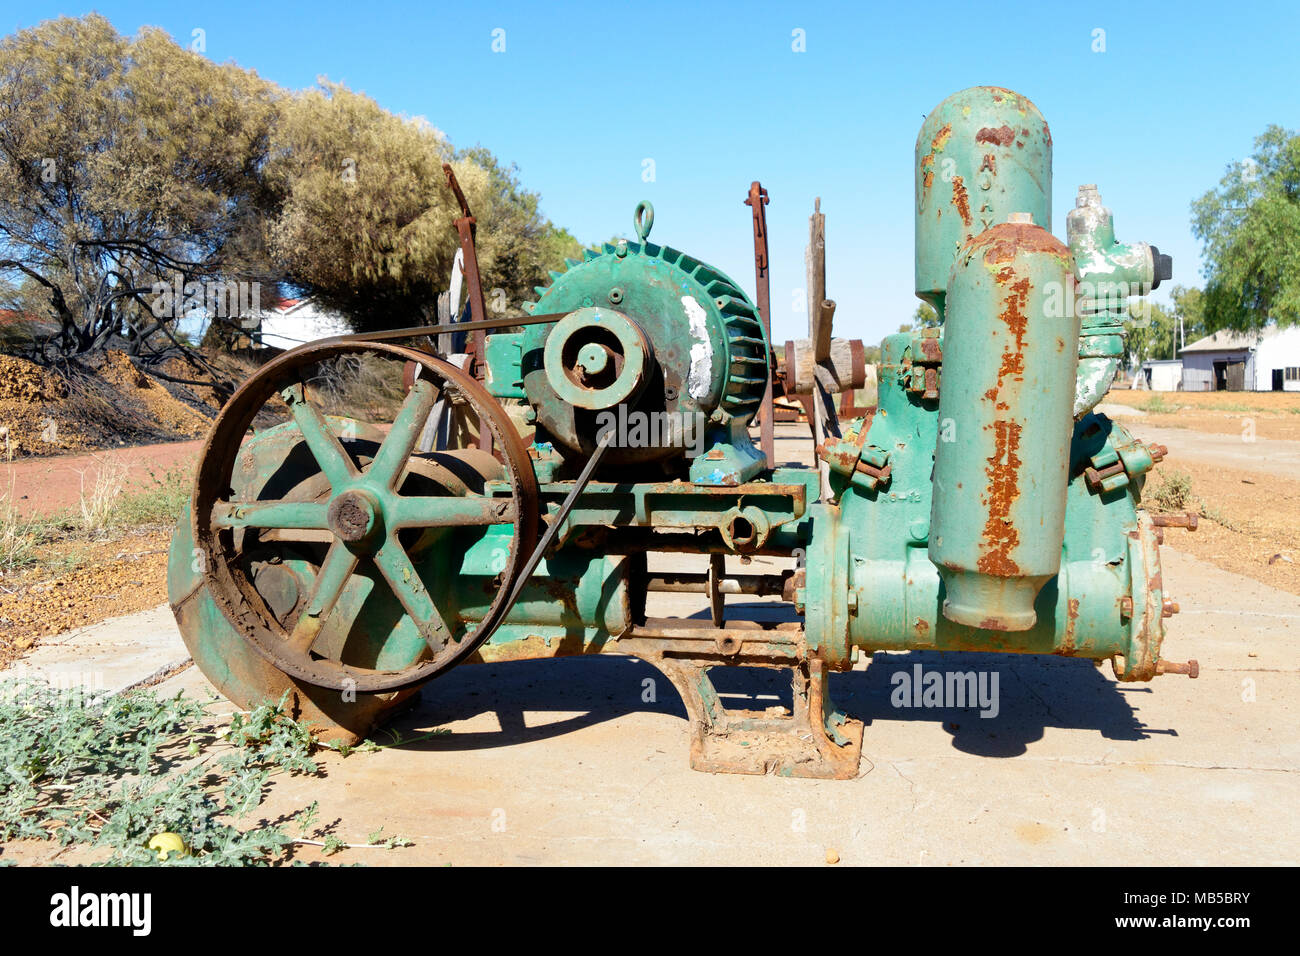 Australian Water Pump High Resolution Stock Photography and Images - Alamy